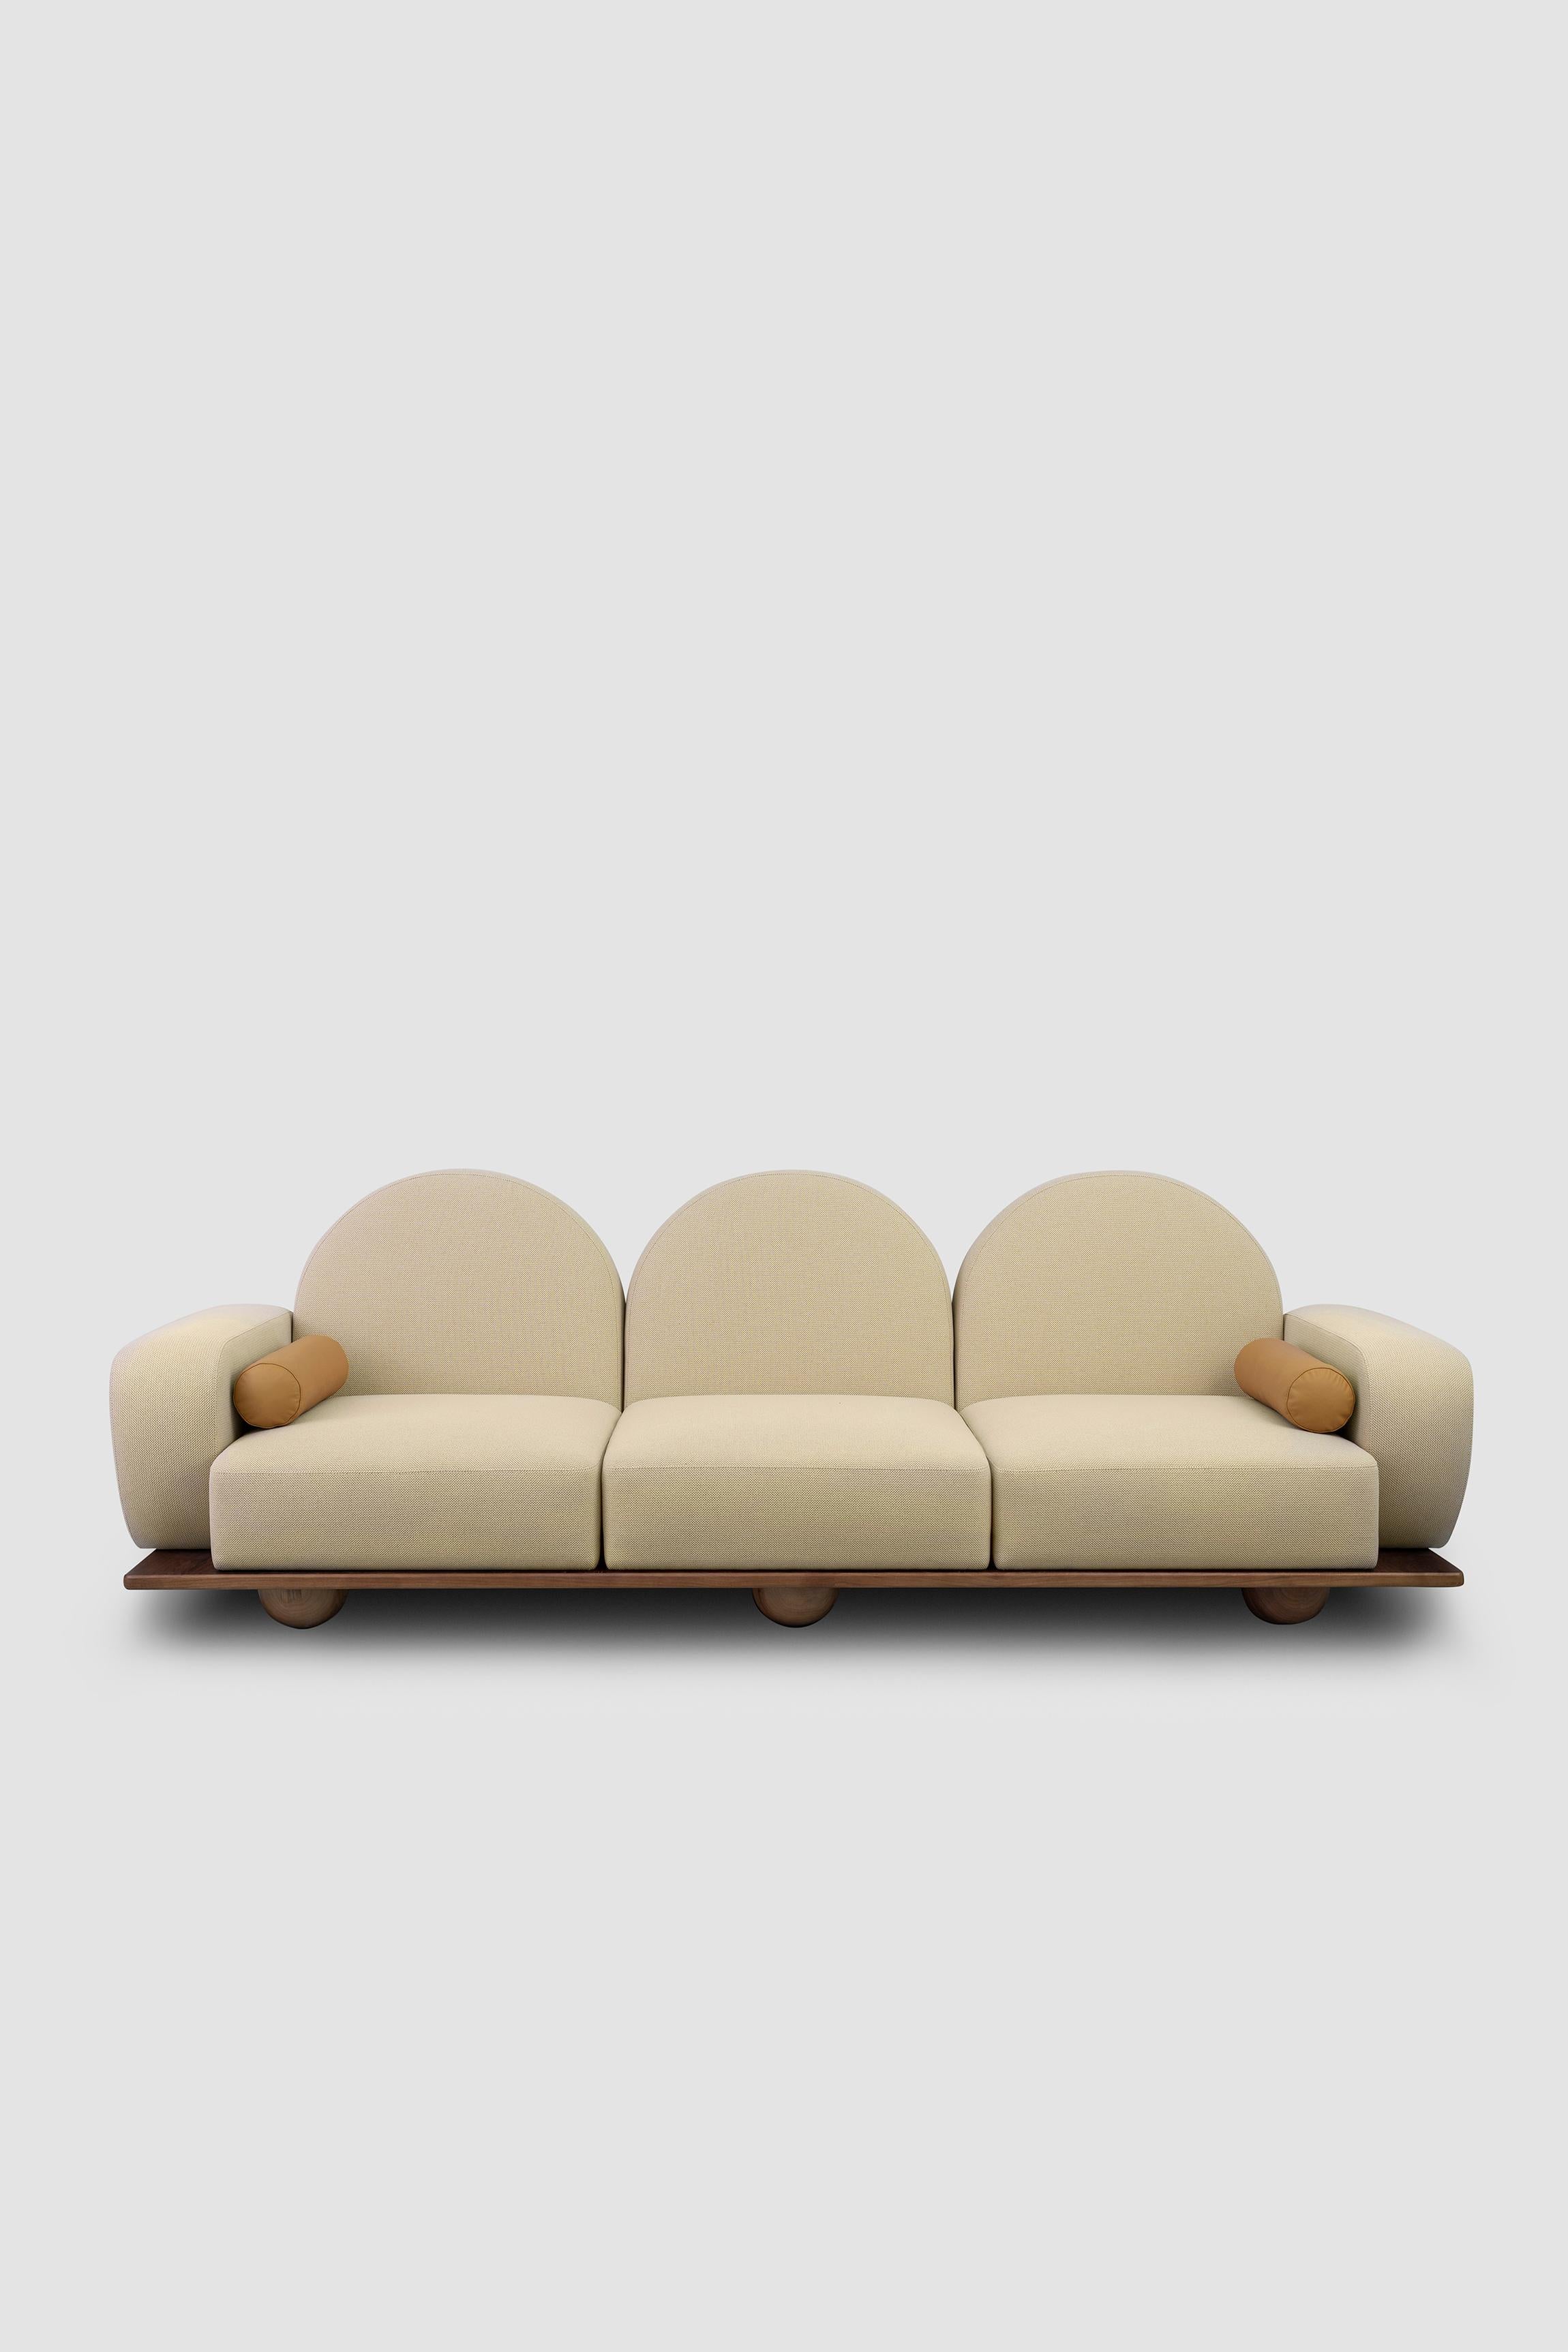 Beice is a 3-seat sofa designed to mimic the feeling of sitting on cotton candy clouds. The combination of its powder pink color, arc shaped back rests, round edges and sphere walnut feet creates a dreamy, tender design. It is wide enough to lay